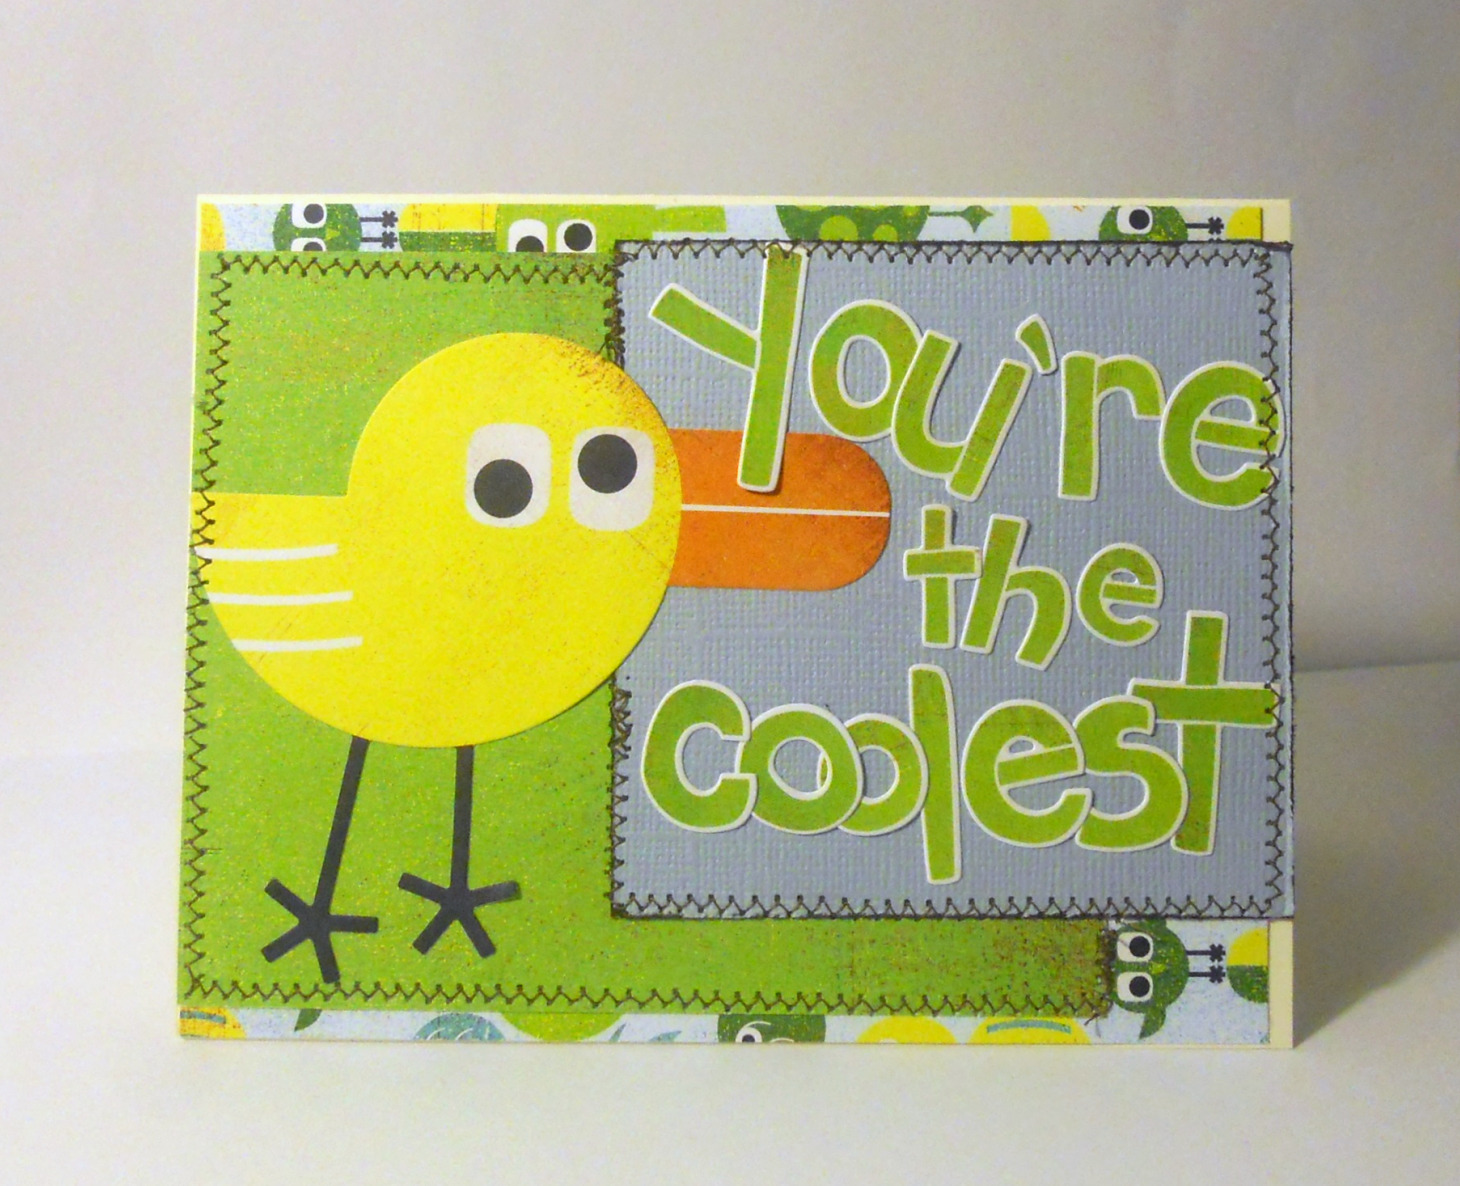 [you're+the+coolest.jpg]